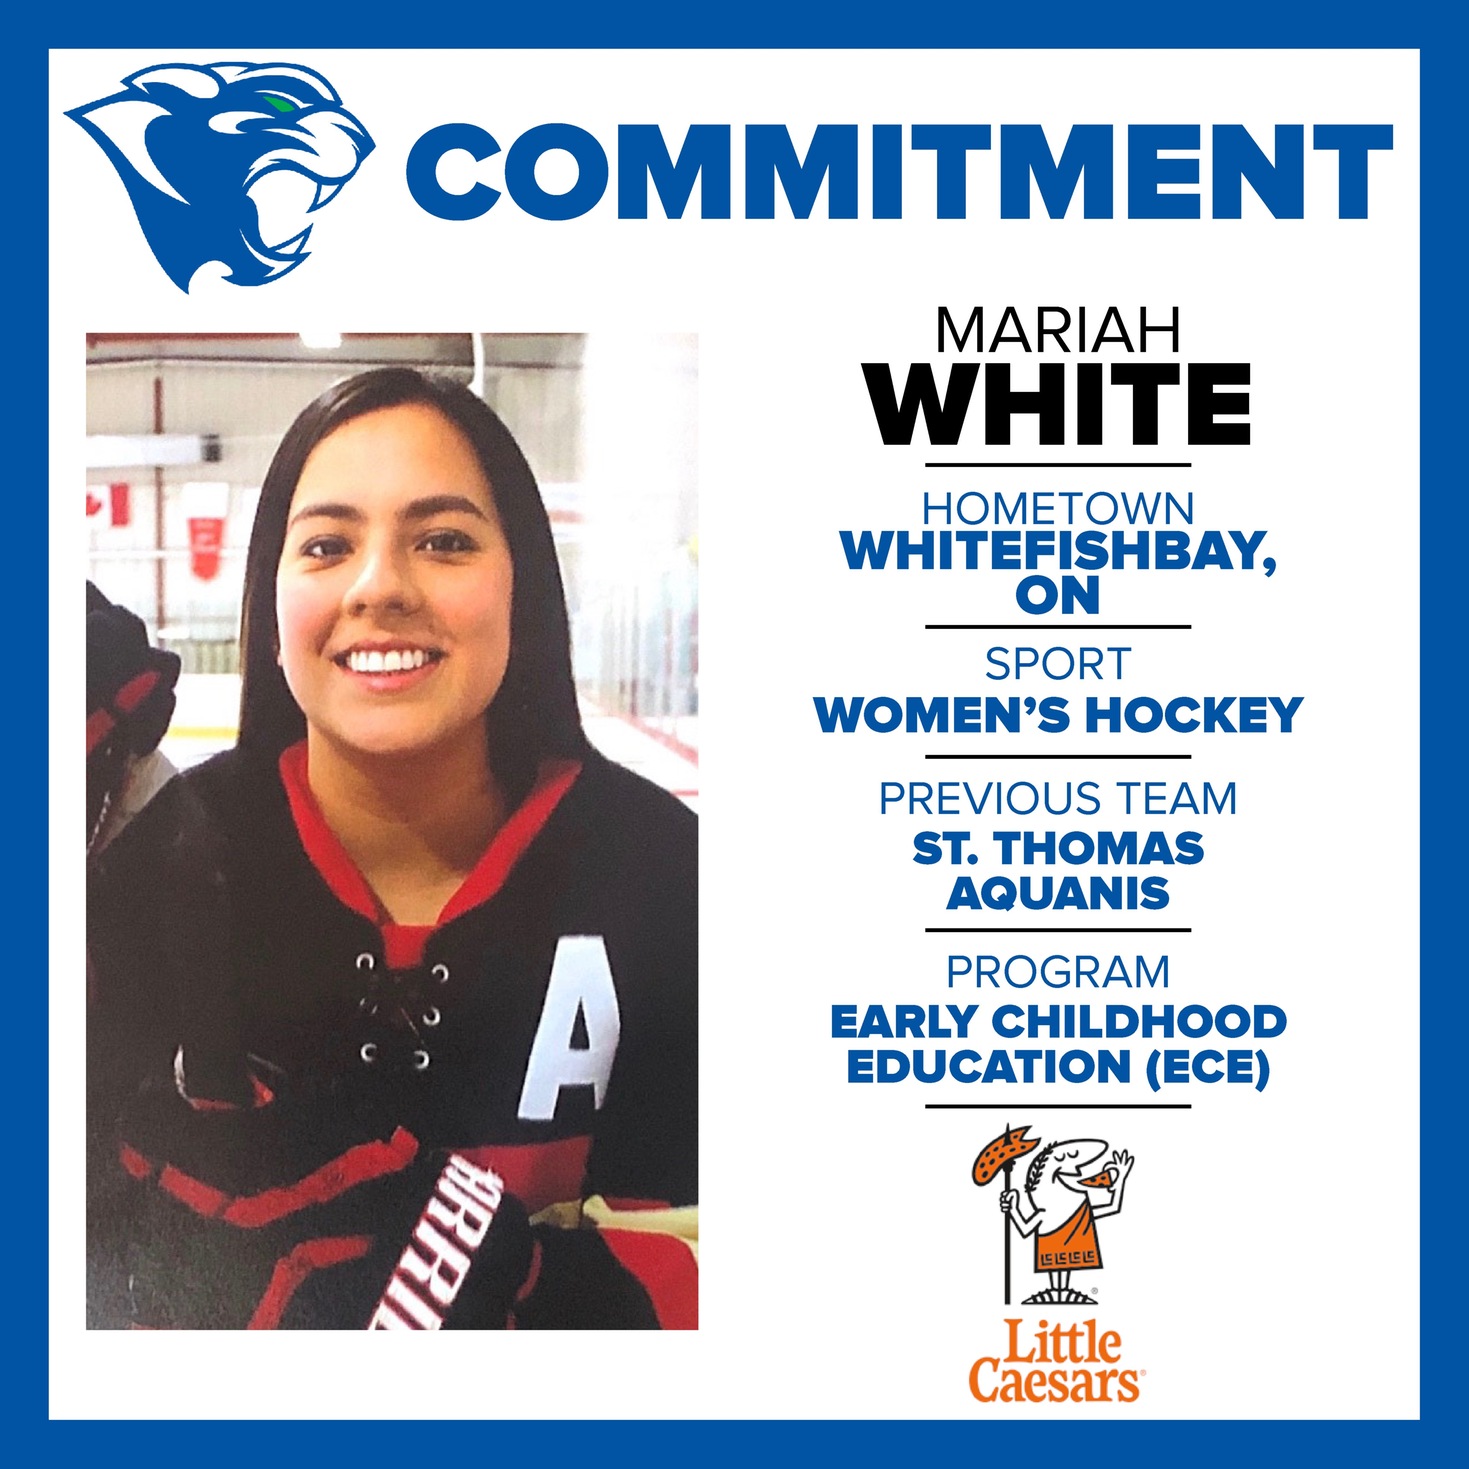 Another Outstanding Player Joins the Women's Hockey Team - Mariah White